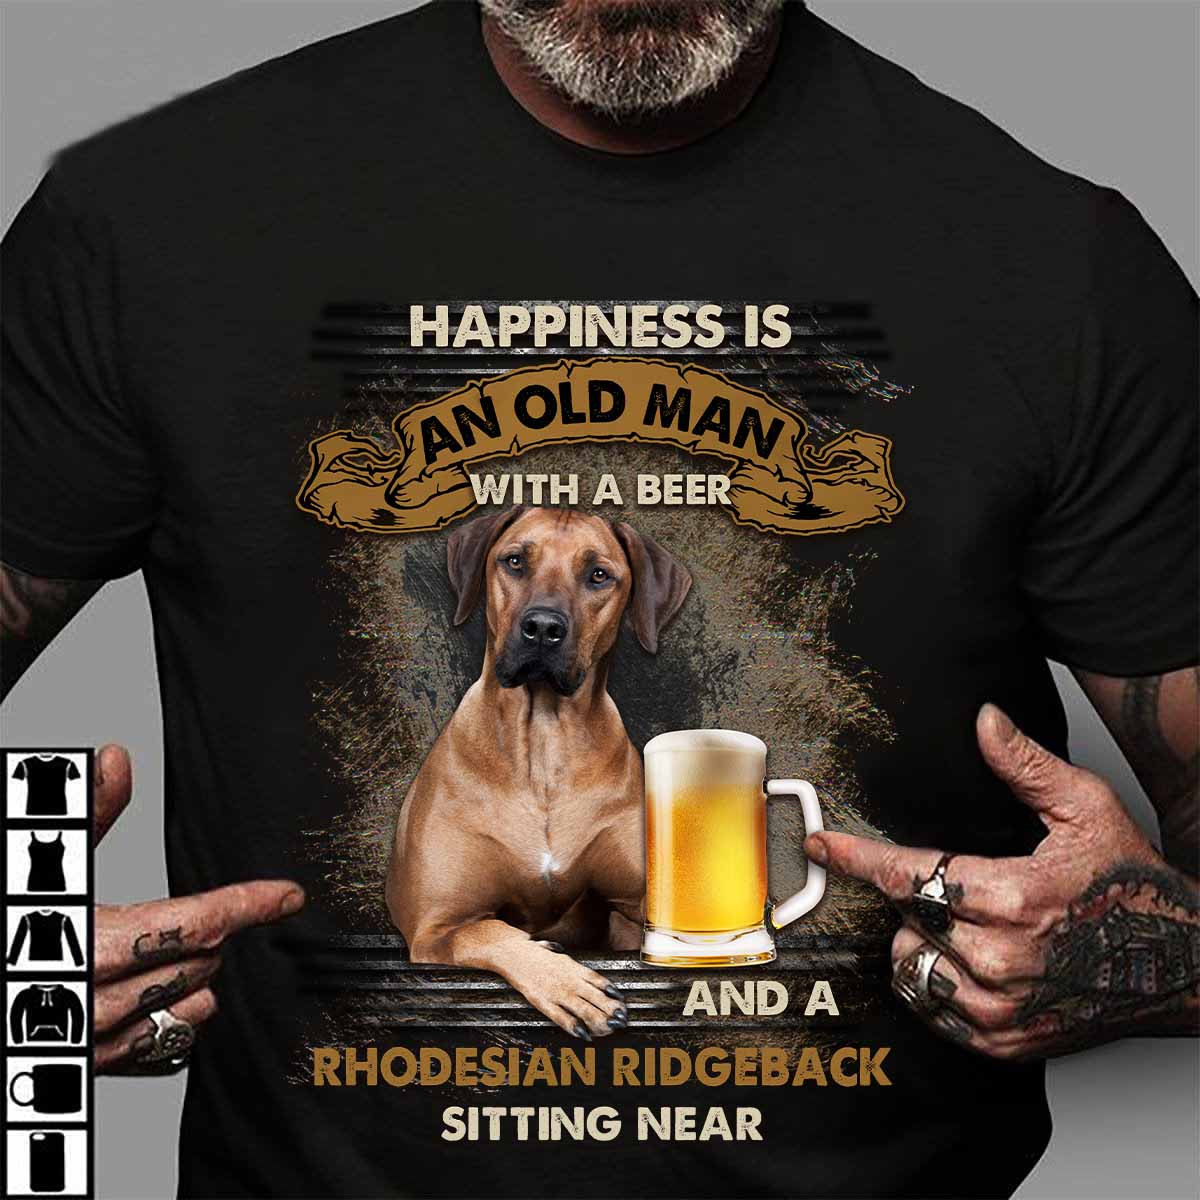 Happiness is an old man with a beer and a Rhodesian Ridegeback sitting near - Beer lover